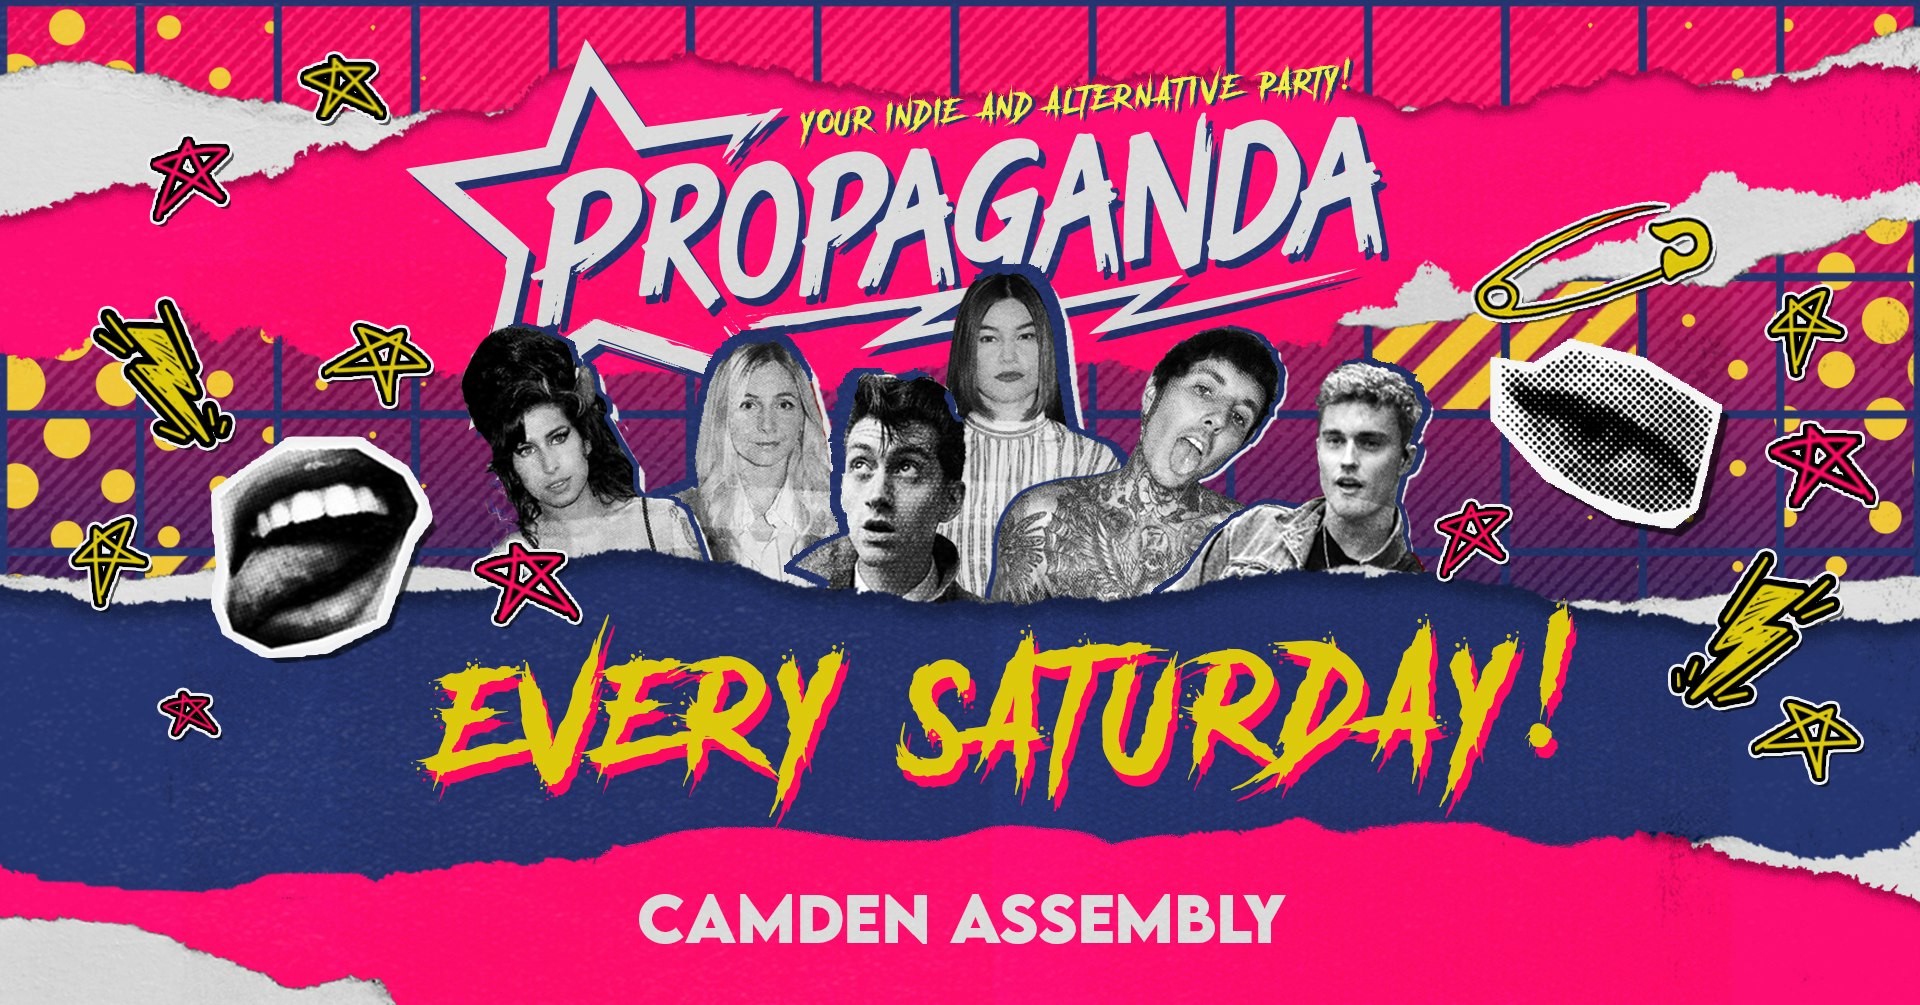 Propaganda London – Your indie & alternative Party at Camden Assembly!